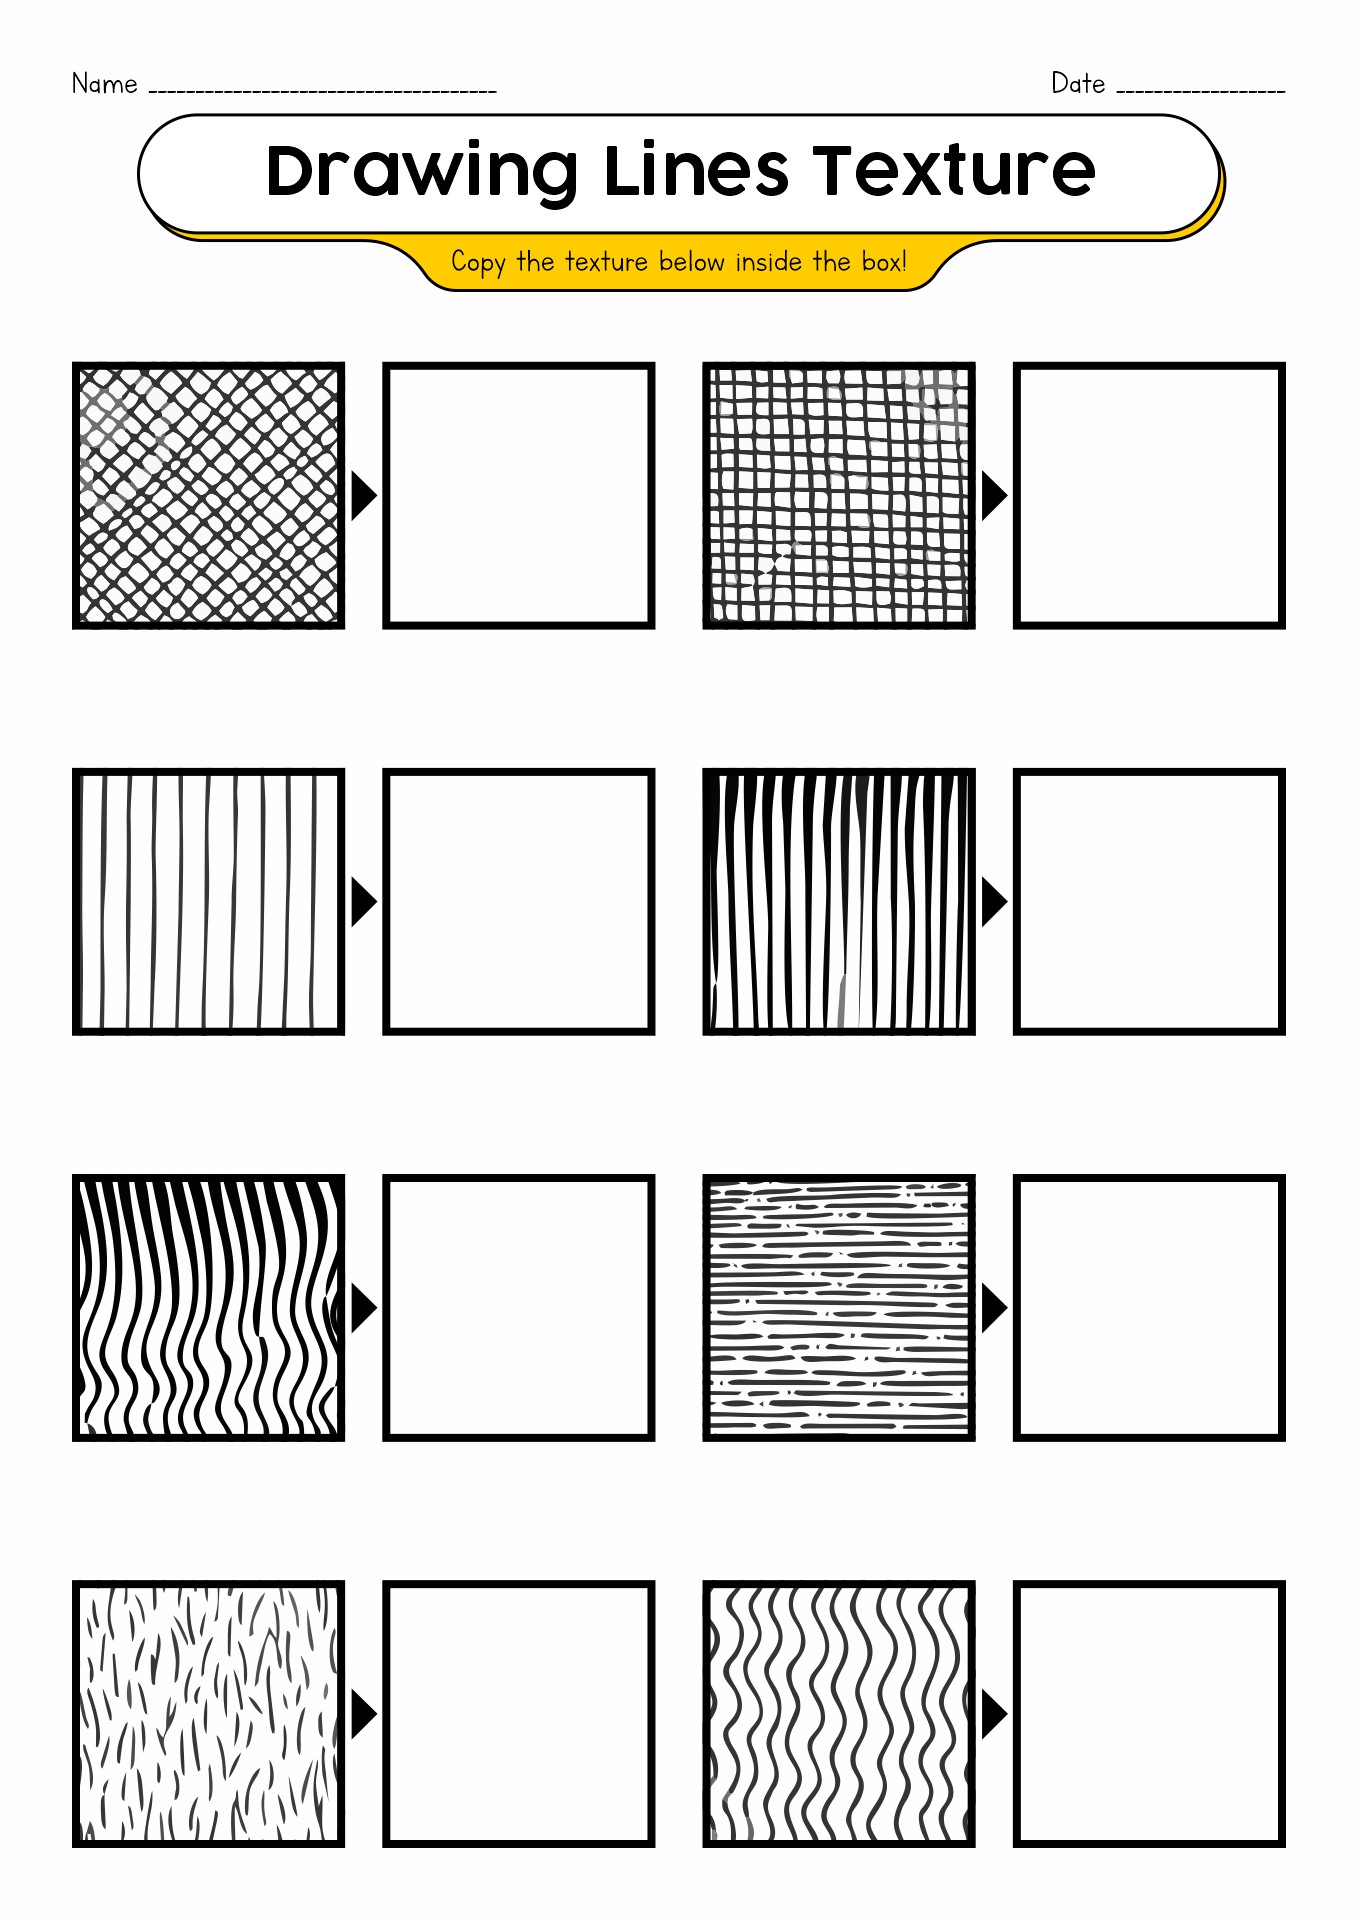 13 Best Images of Texture Line Drawing Techniques Worksheet - Art